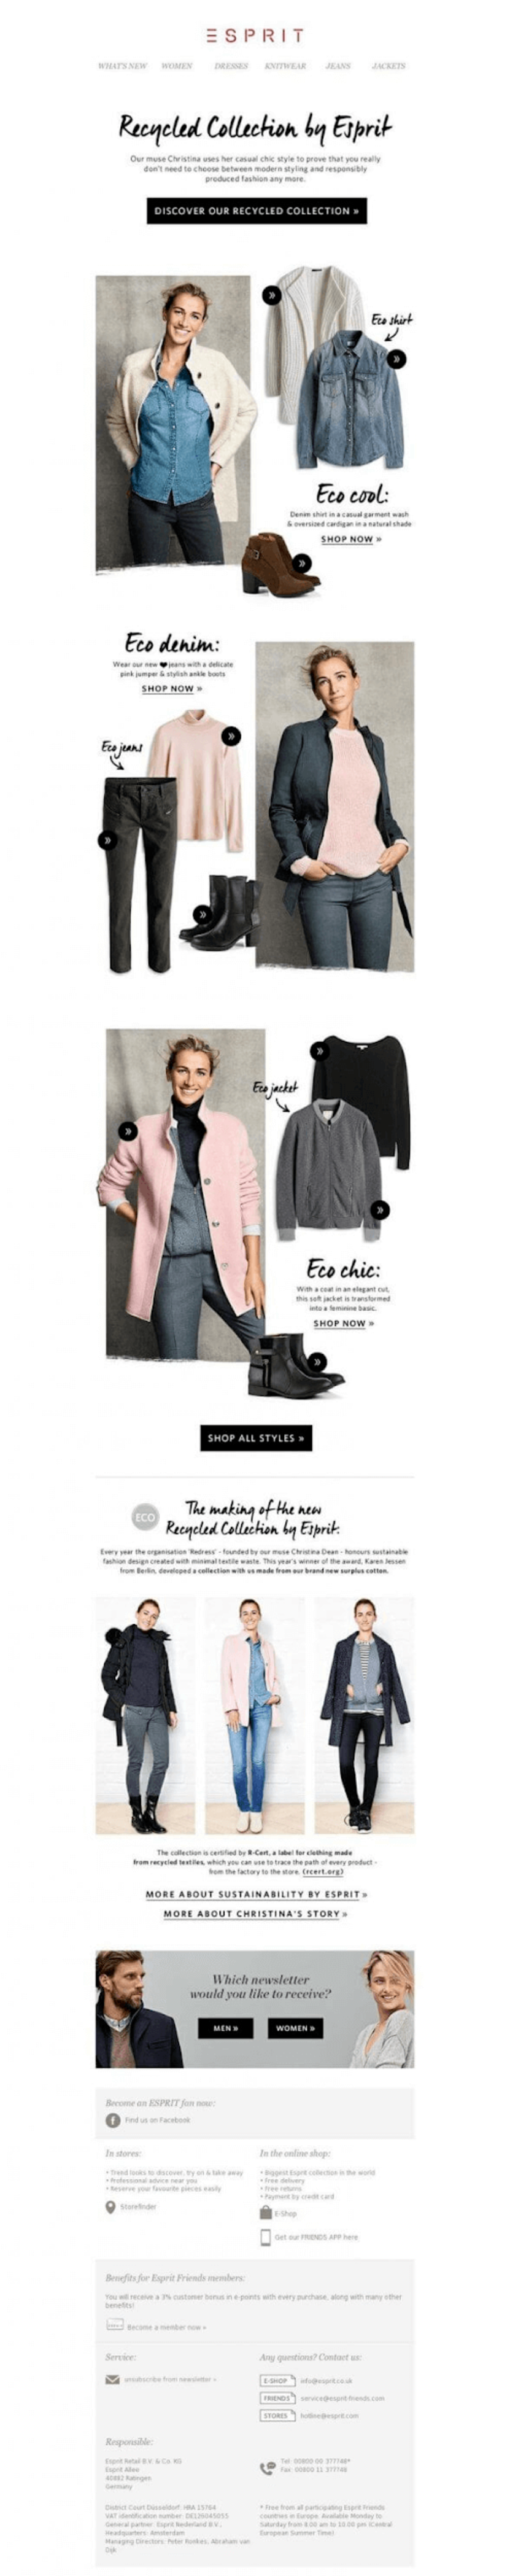 Increase conversion rate tip: Esprit's email personalization strategy